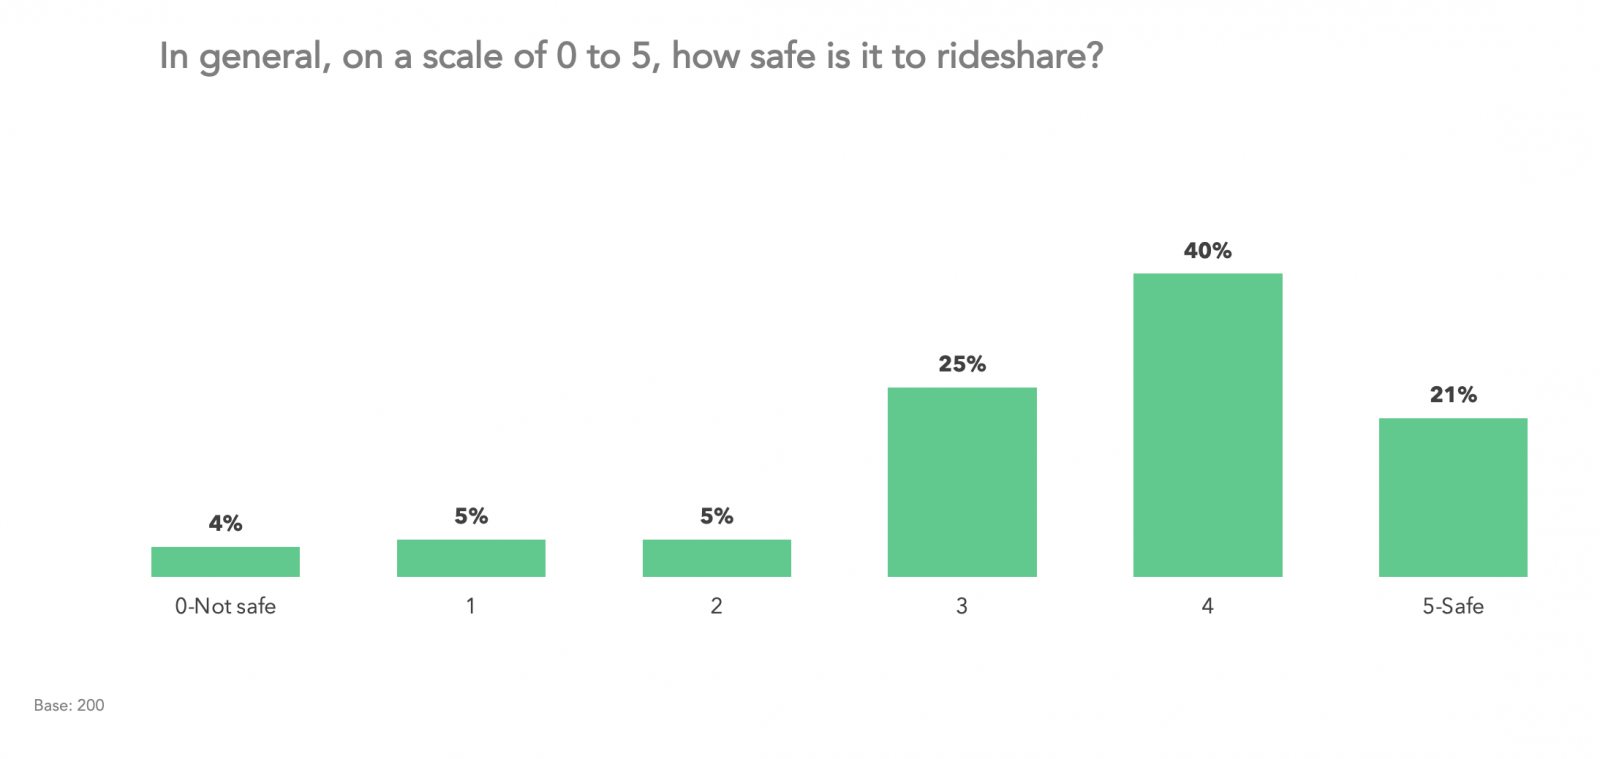 In general, 86% say it’s safe to rideshare. 